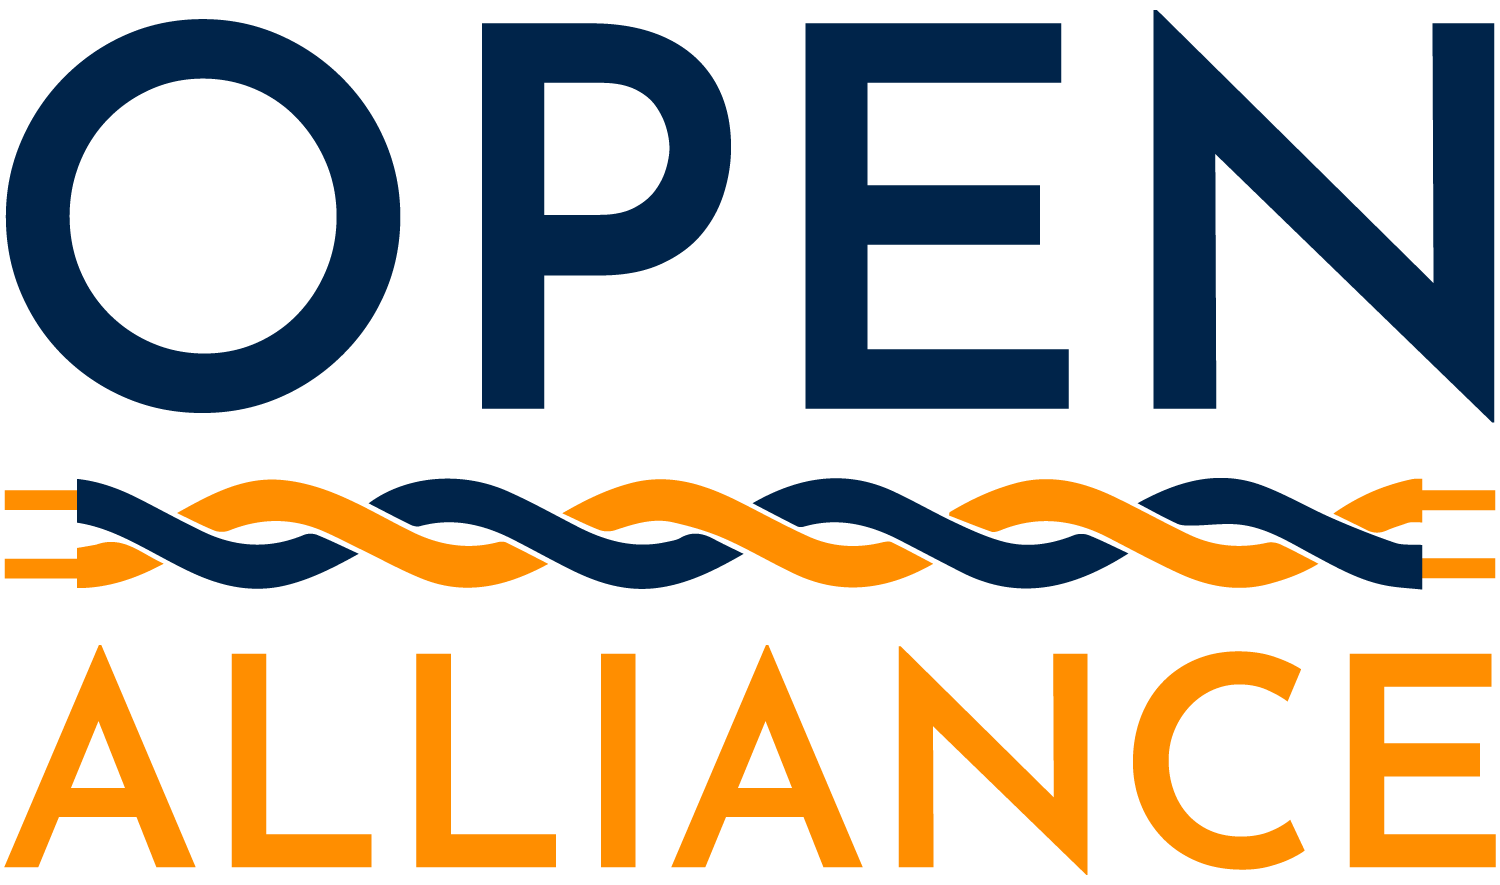 www.opensig.org